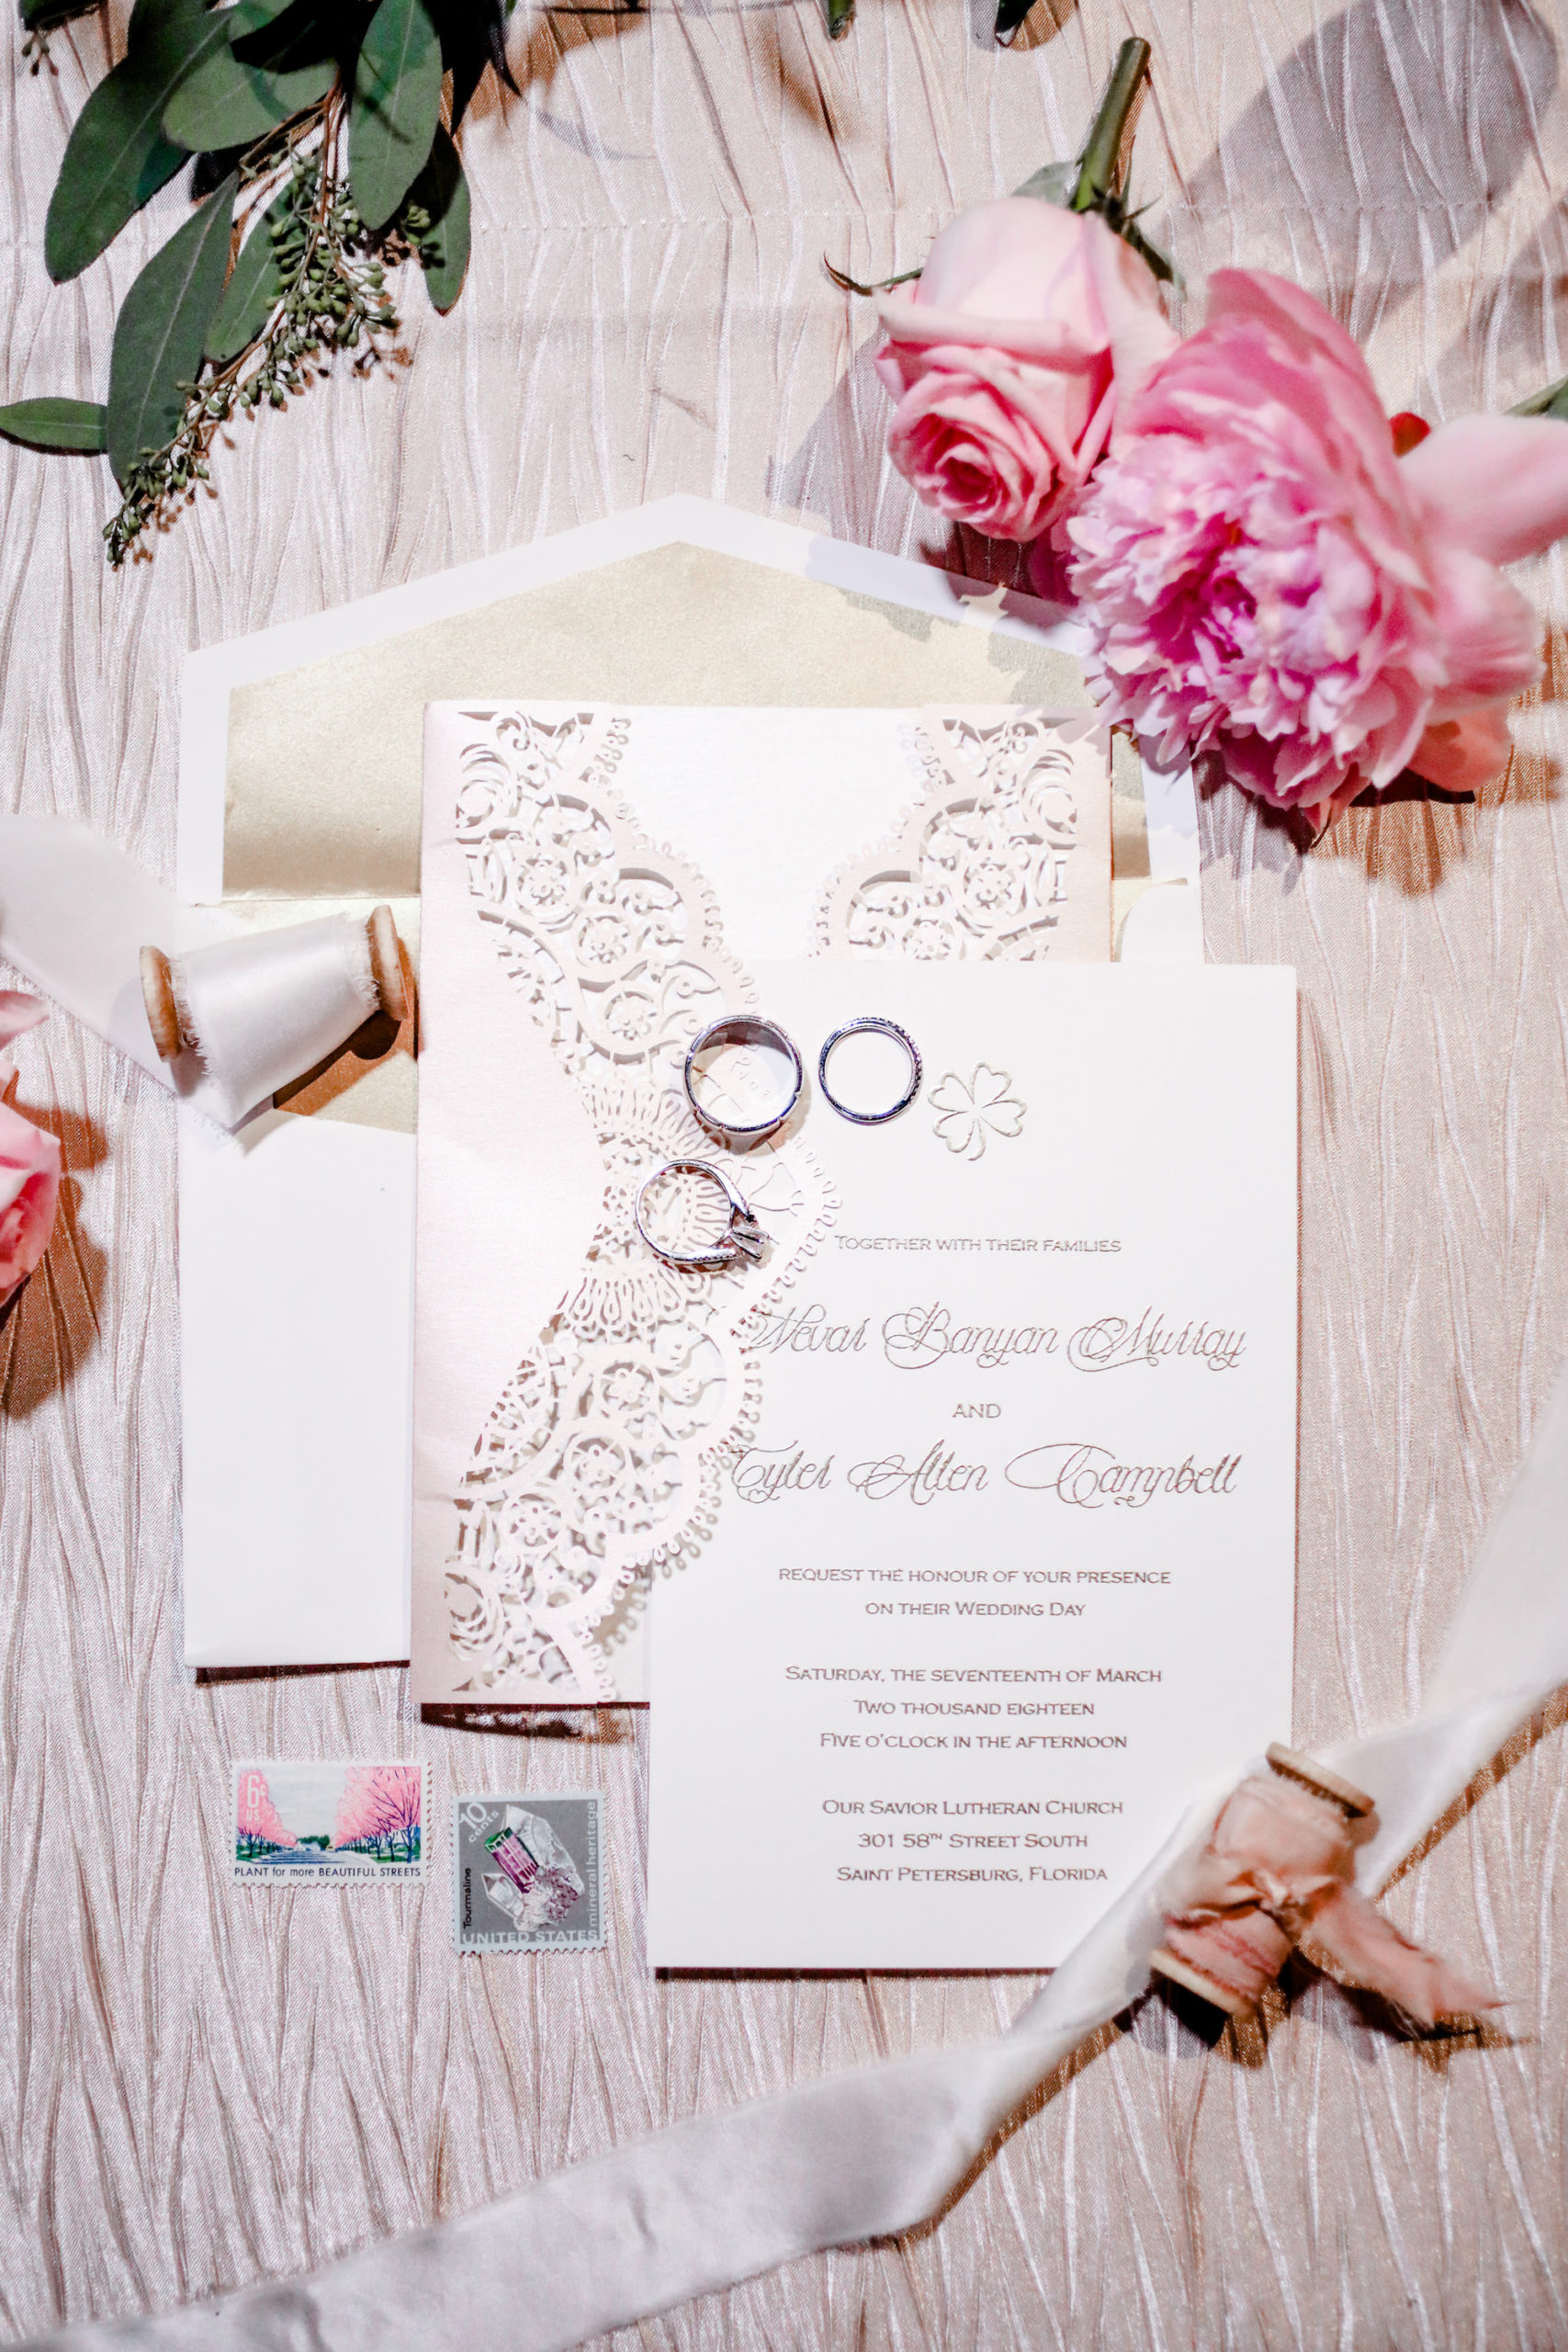 Elegant Wedding Invitation and Details, Vintage Inspired Dusty Rose Blush Pink Accents | Tampa Bay Wedding Photographer Lifelong Photography Studio